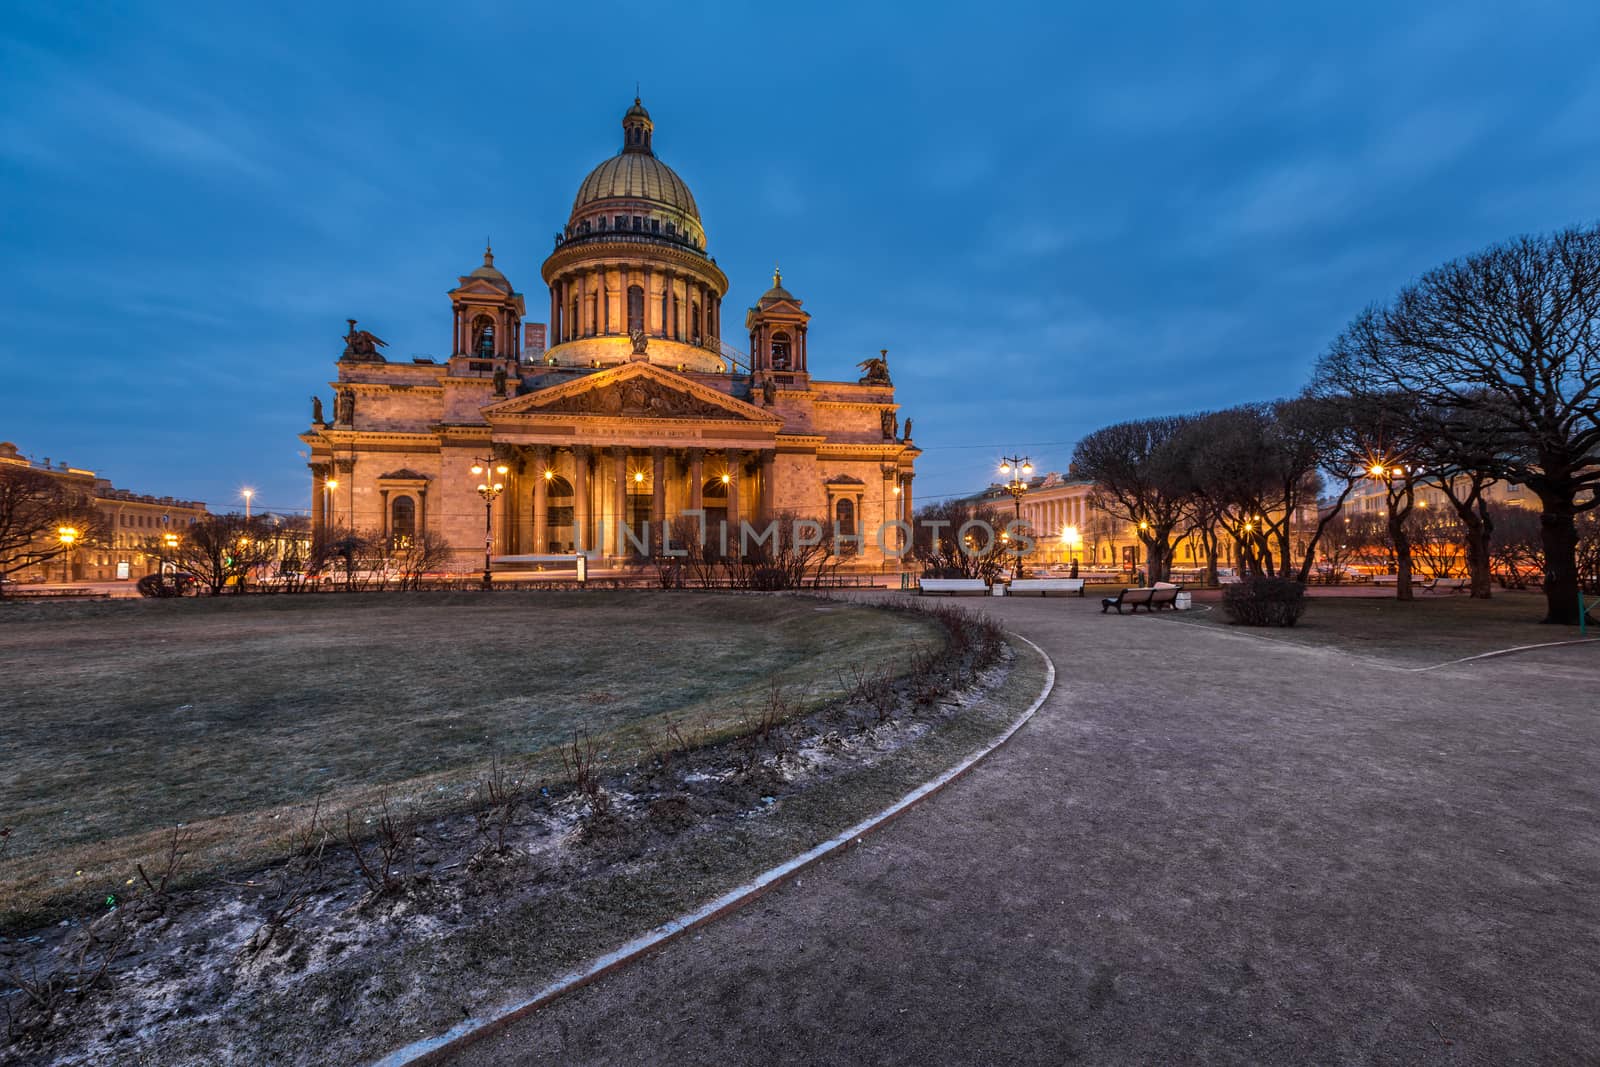 Saint Isaac's Cathedral in the Evening, Saint Petersburg, Russia by anshar